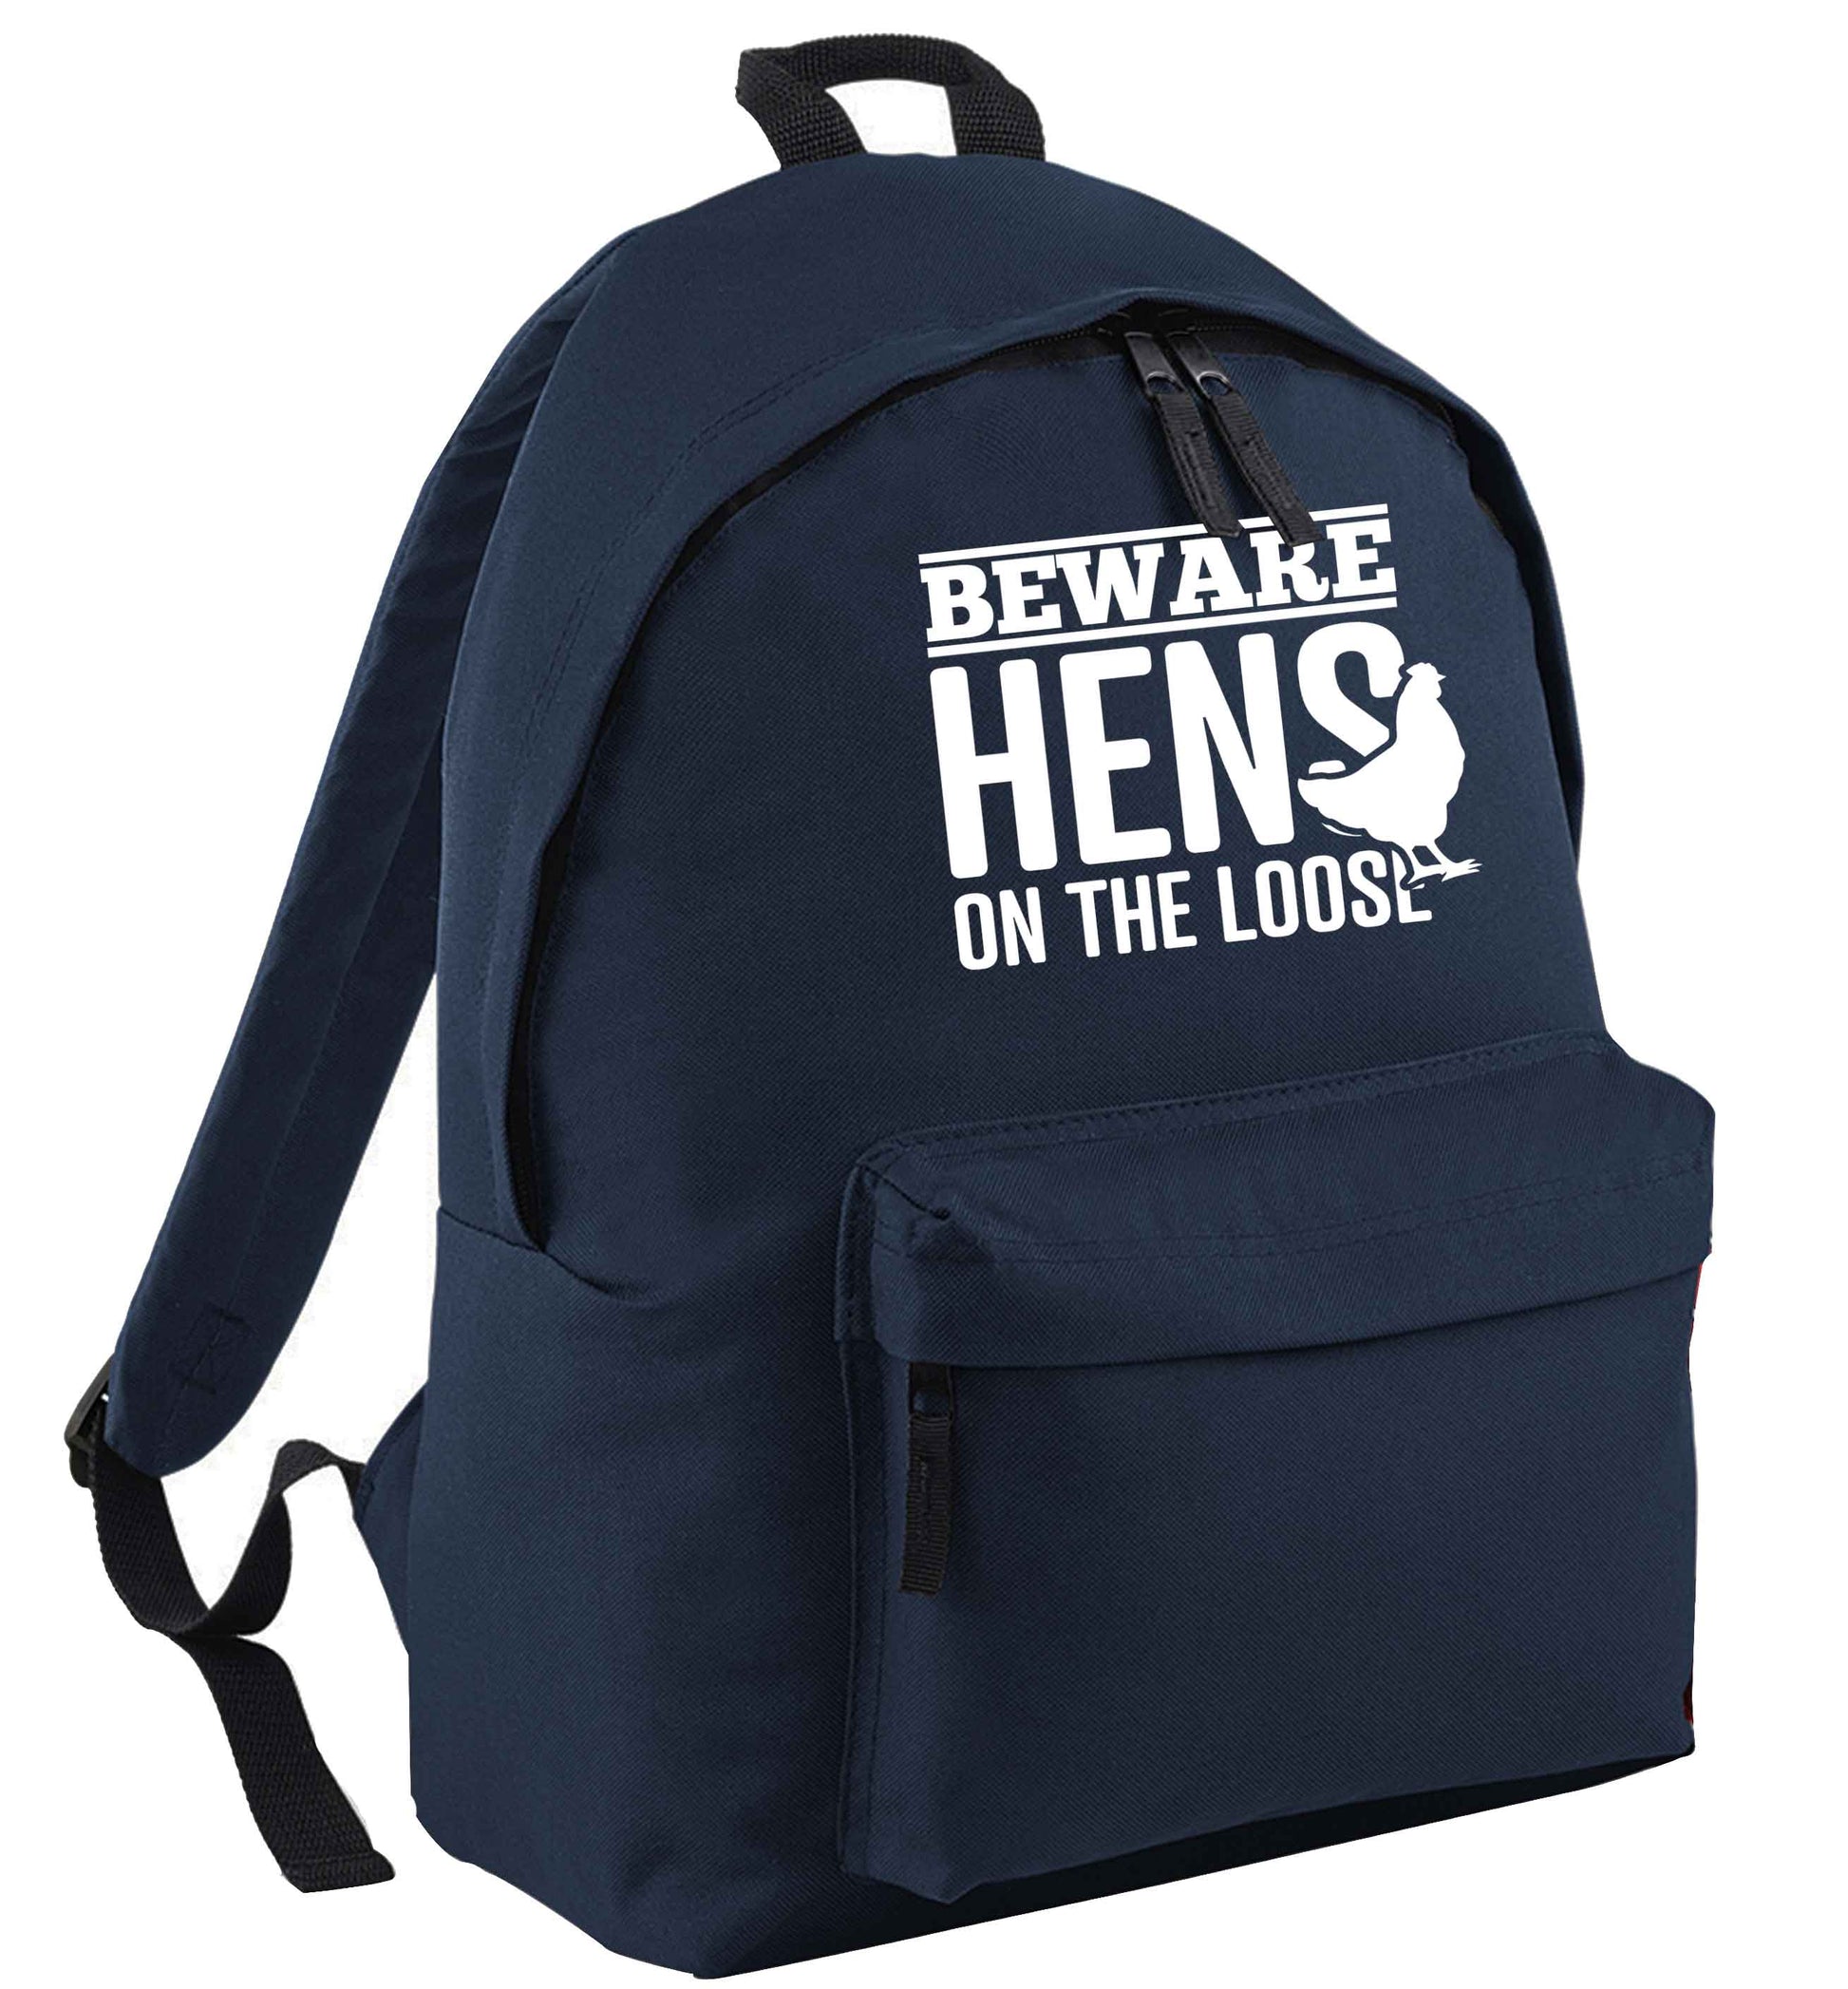 Beware hens on the loose navy adults backpack